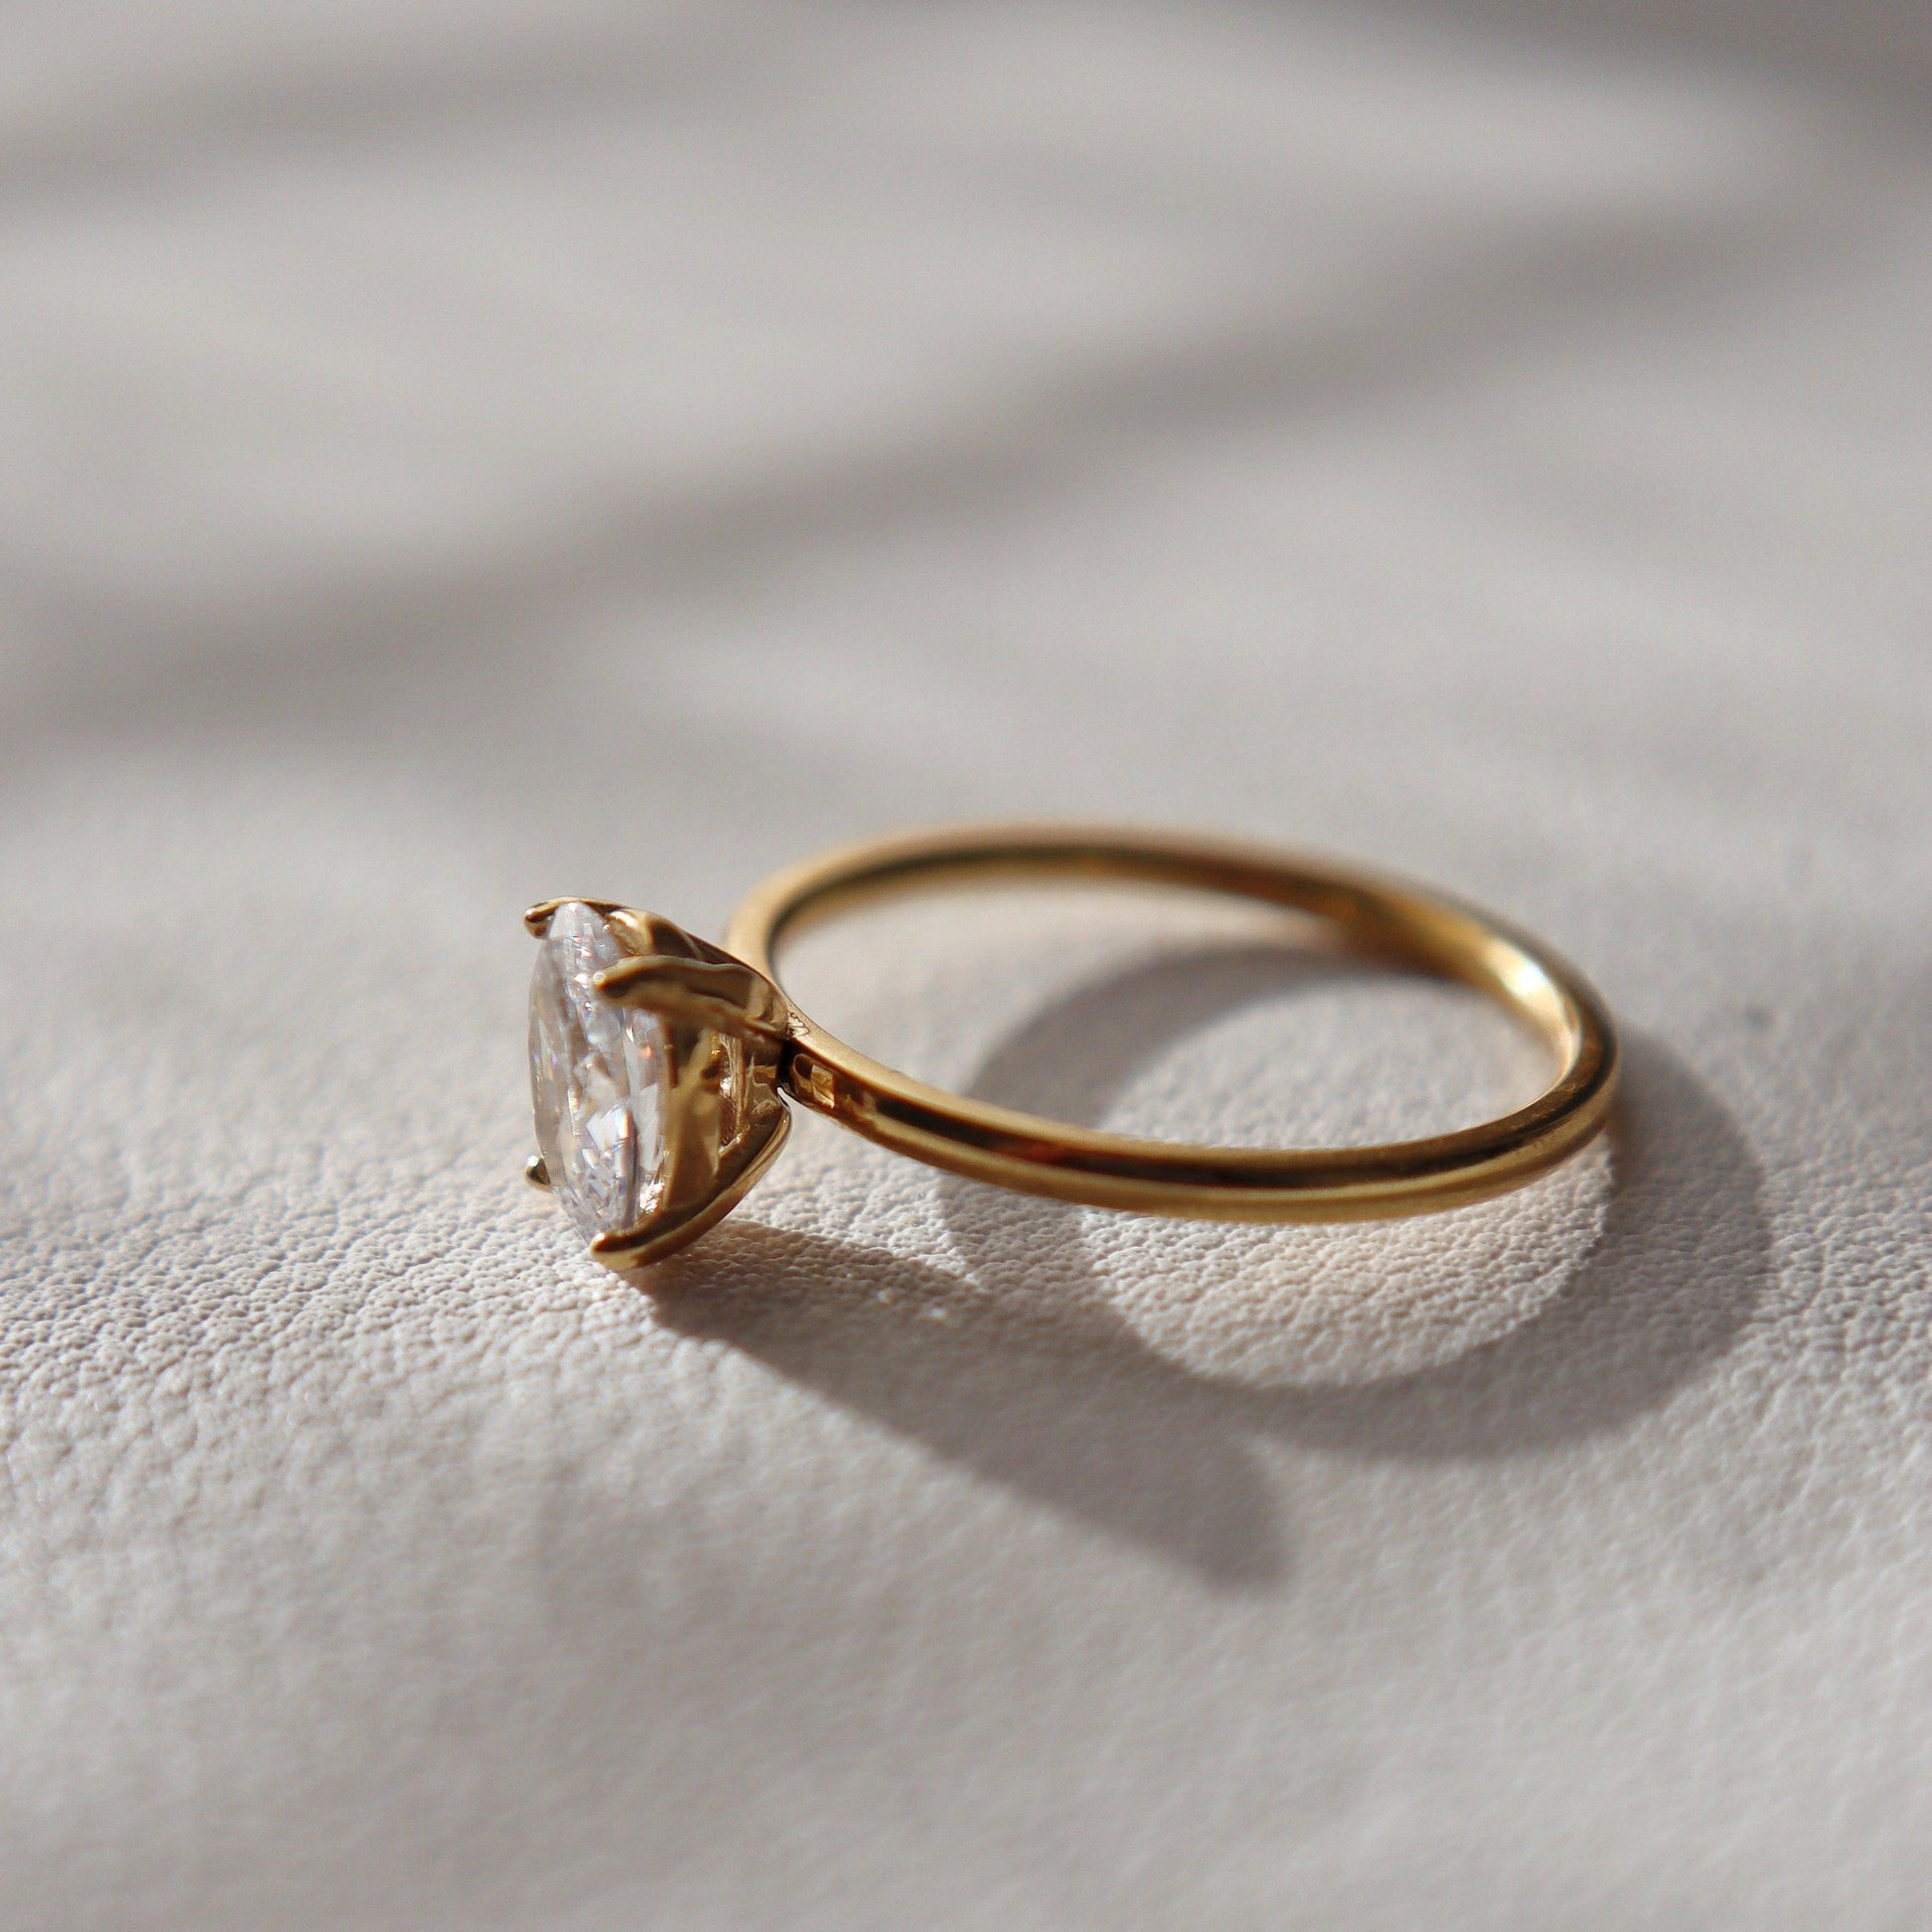 Oval Solitaire Ring | Zirconia Ring - JESSA JEWELRY | GOLD JEWELRY; dainty, affordable gold everyday jewelry. Tarnish free, water-resistant, hypoallergenic. Jewelry for everyday wear